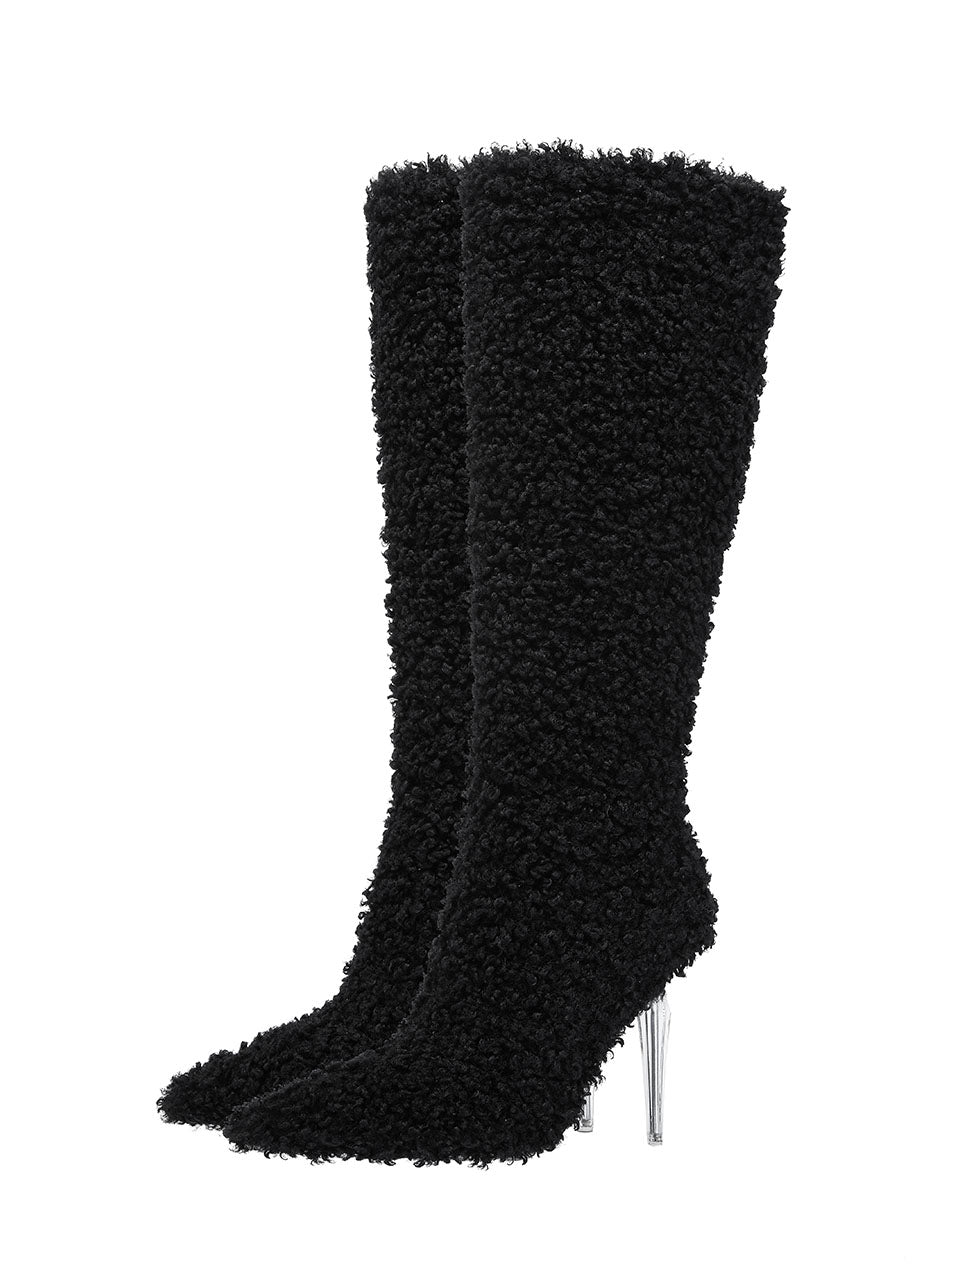 Black High Heel Pointed Toes Lambswool Retro Short Boots Shoes